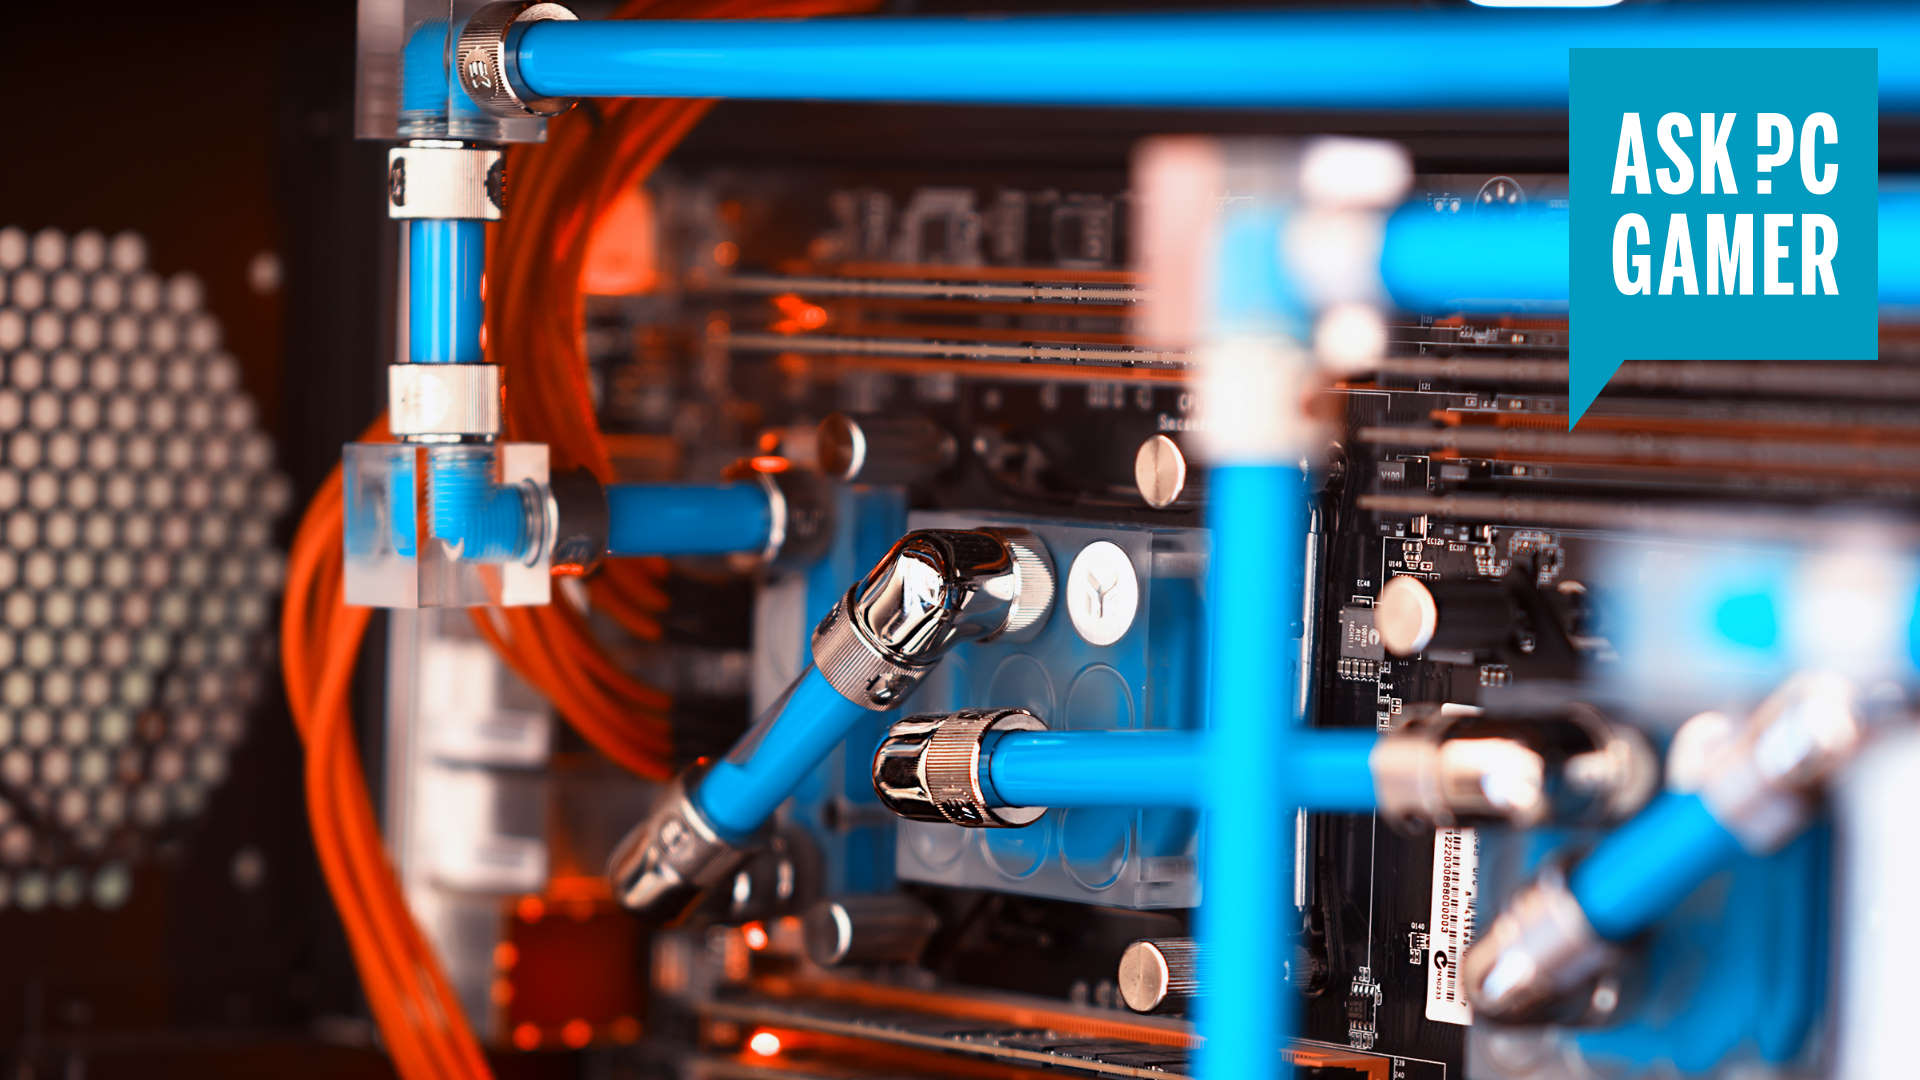 Is liquid-cooling your PC safe?